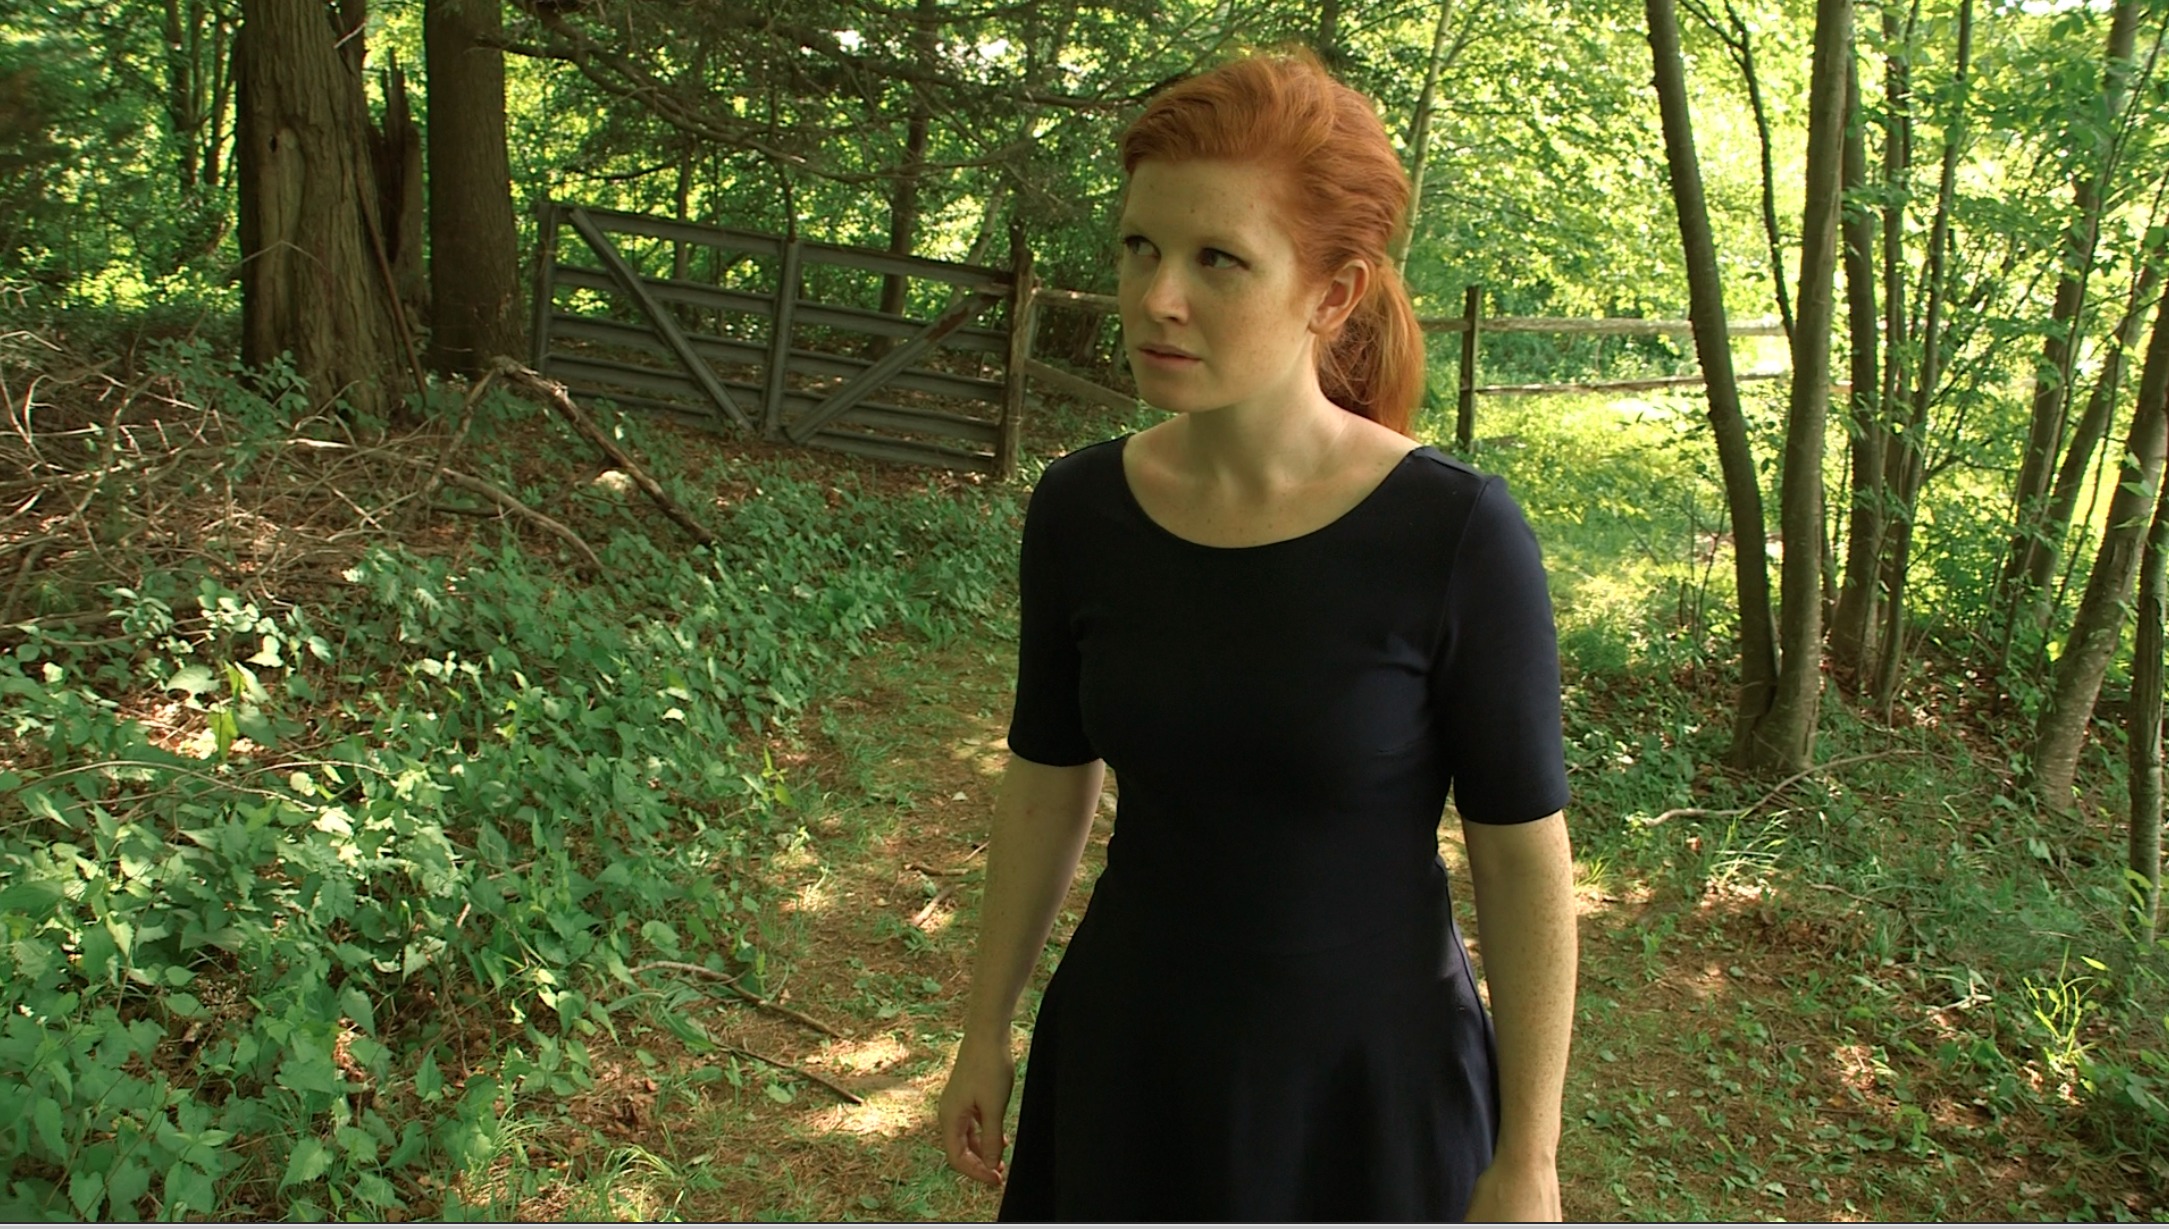 Emma as Hanna in upcoming short film, premiering in Fall 2014.